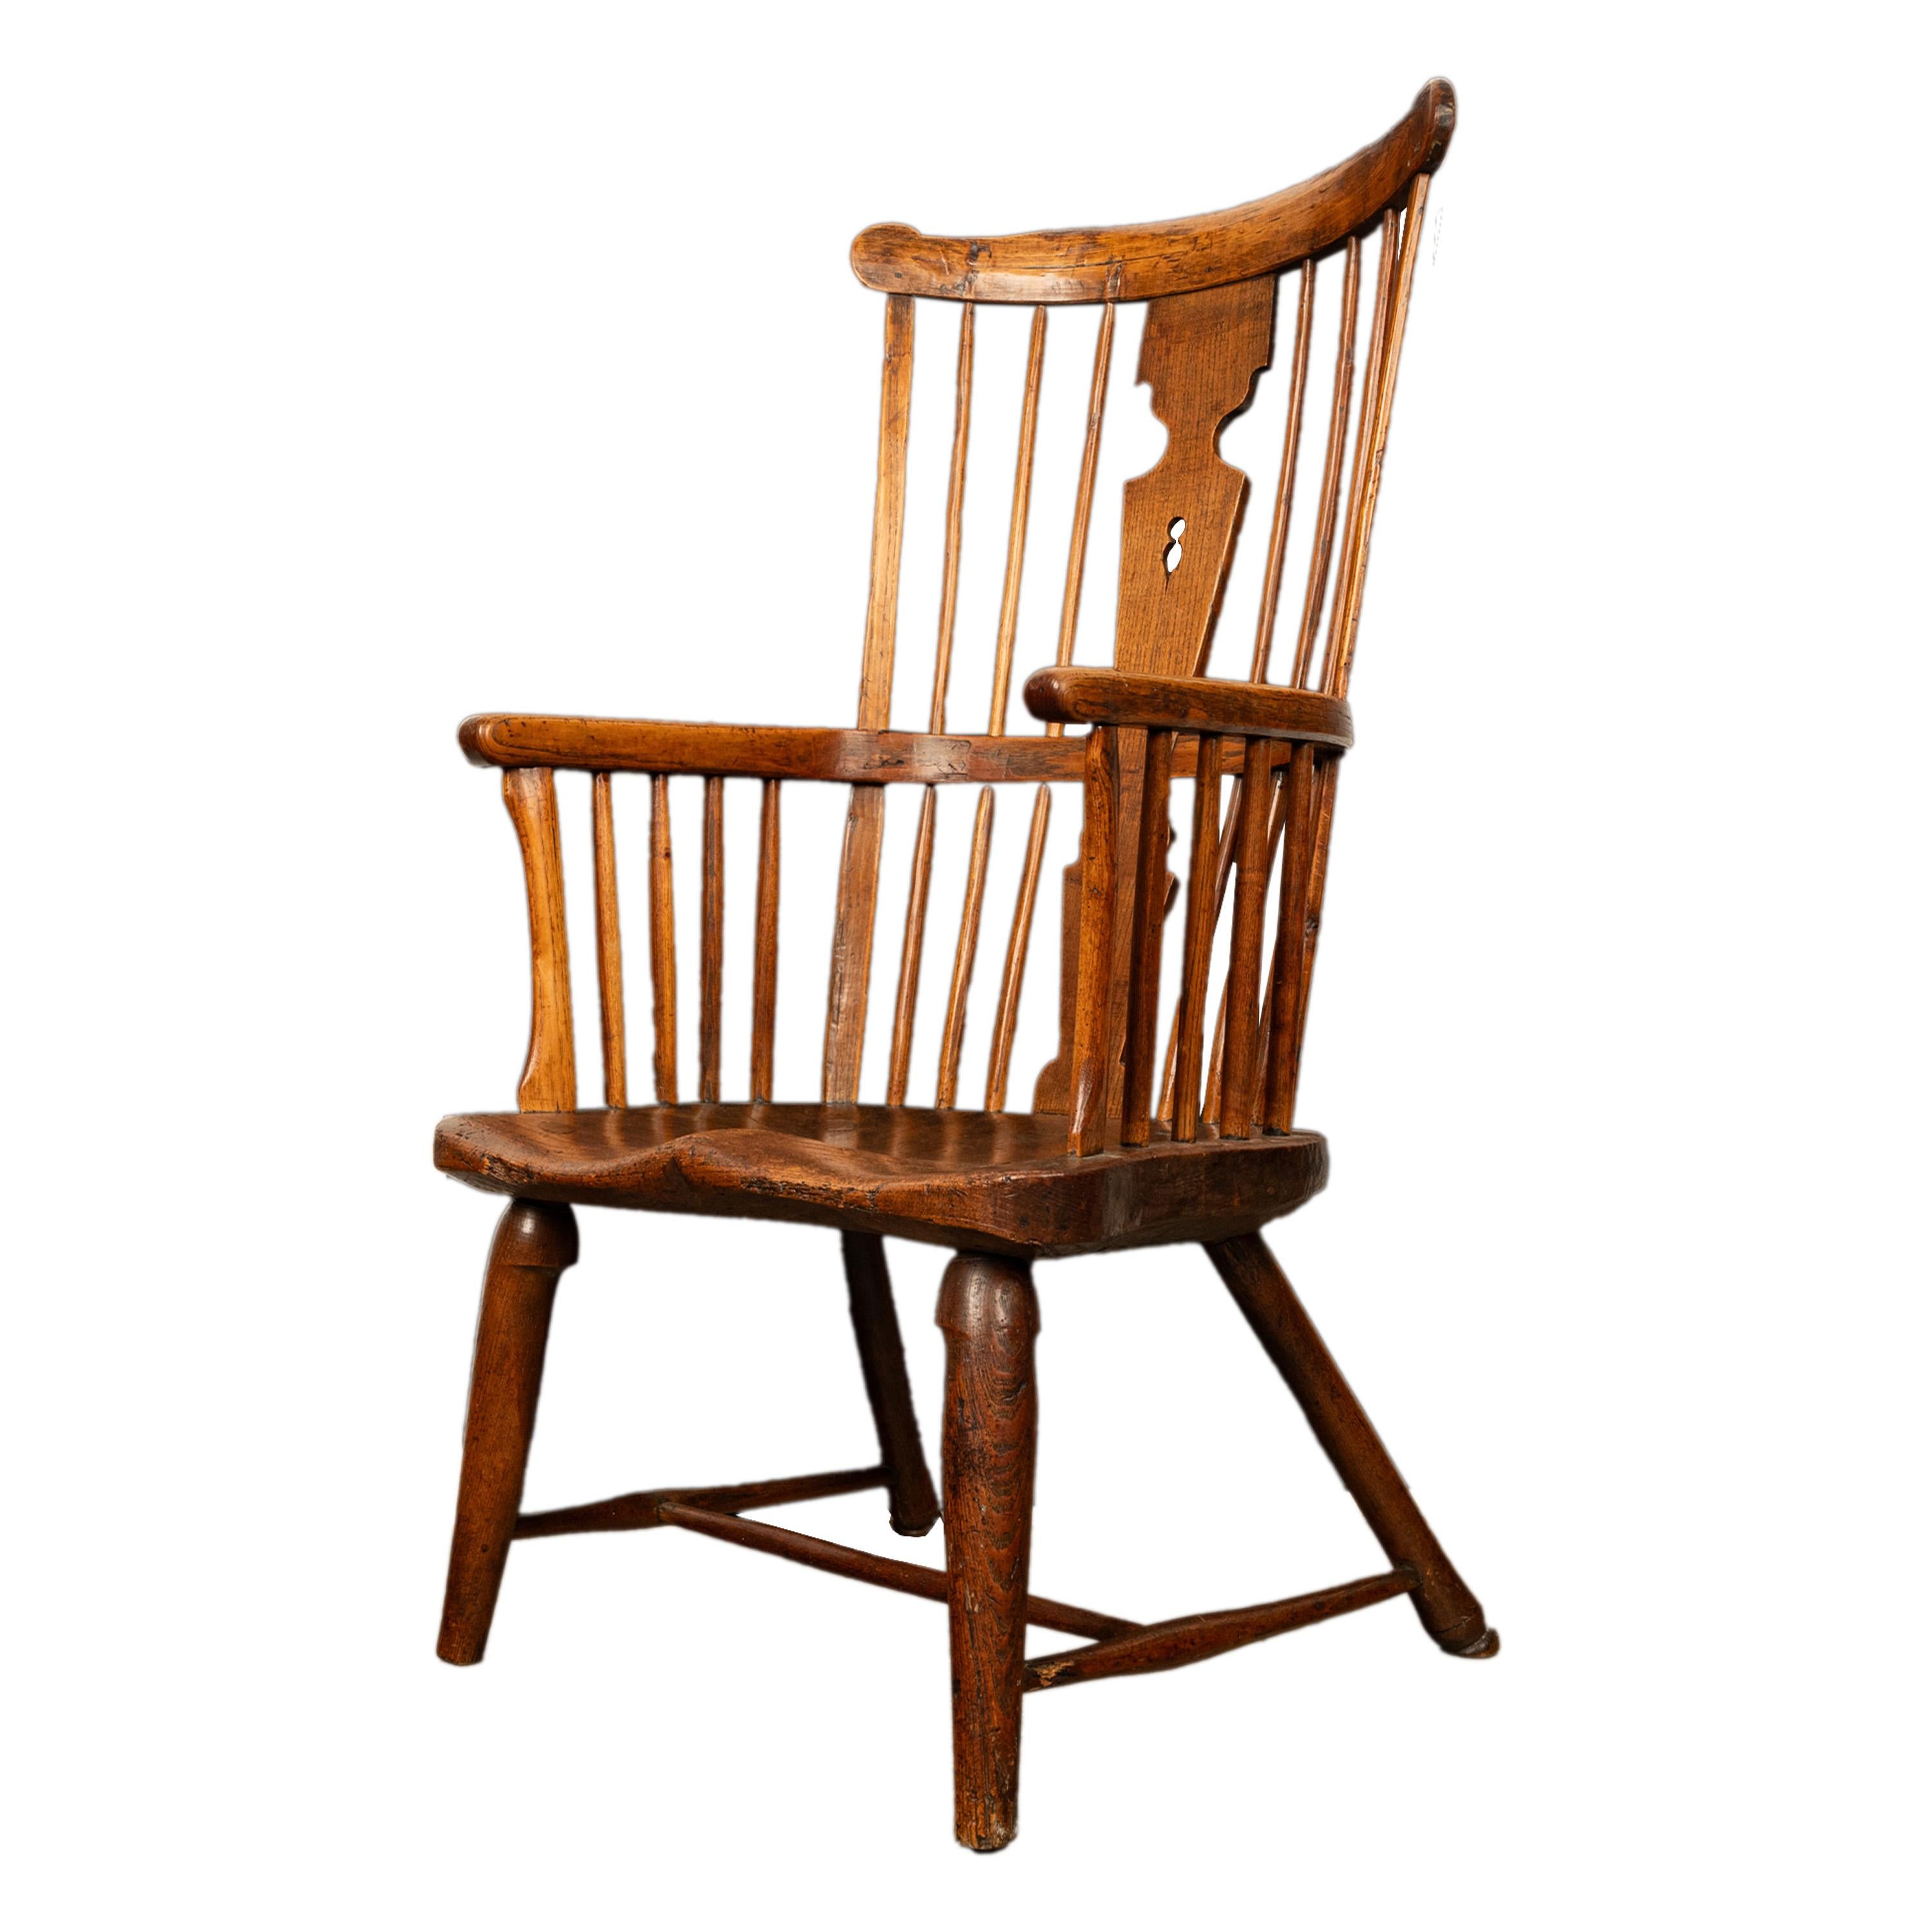 Important Antique Earliest Recorded English Windsor Chair by Kerry Evesham 1793 In Good Condition For Sale In Portland, OR